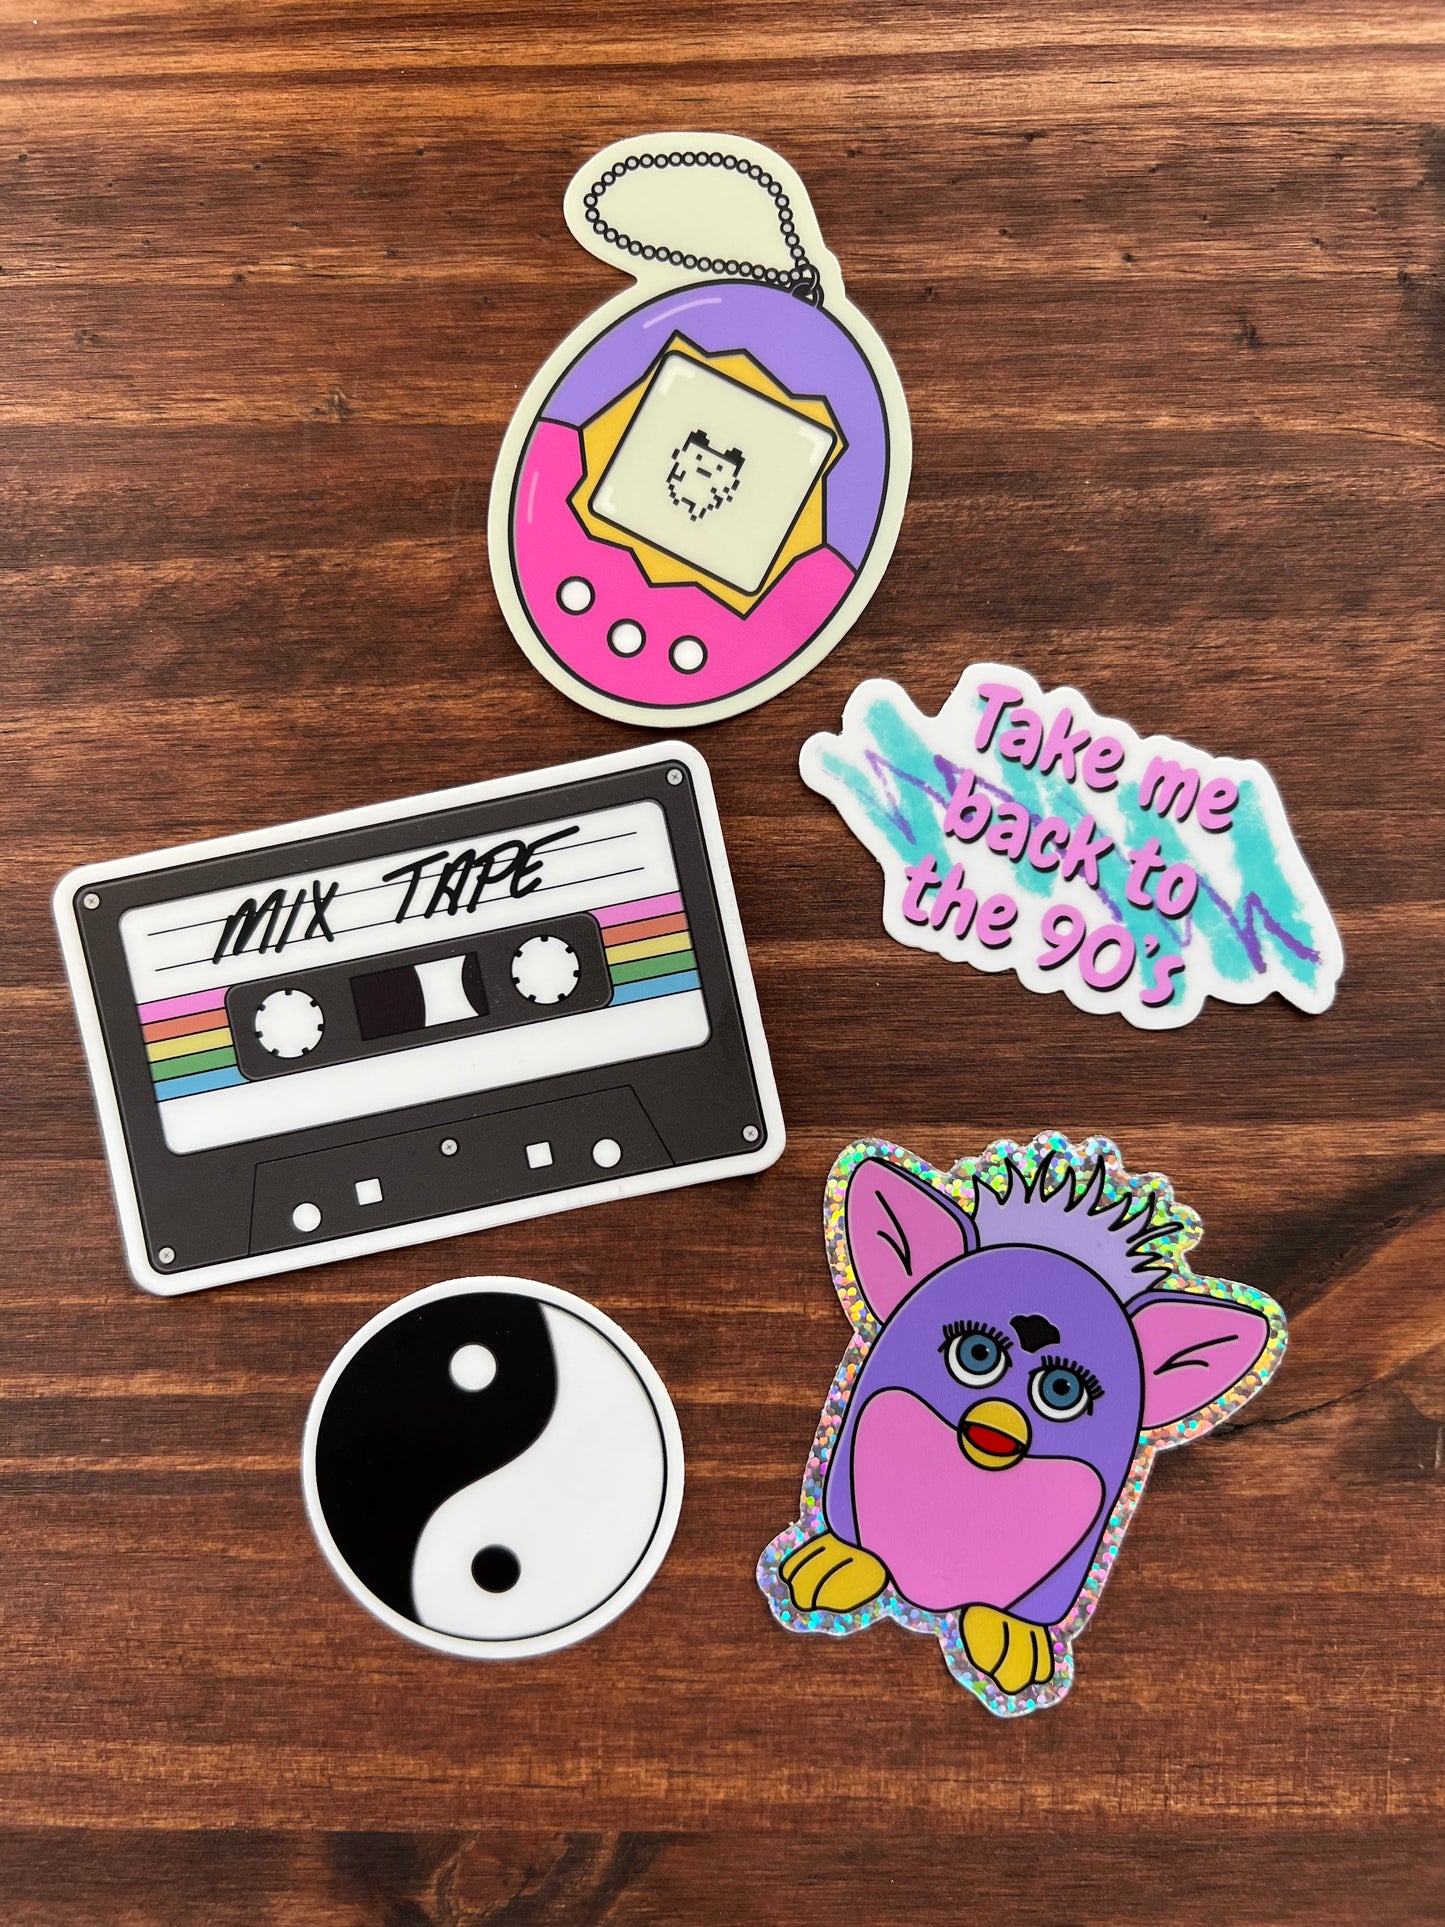 Take Me Back To The 90s Sticker Pack